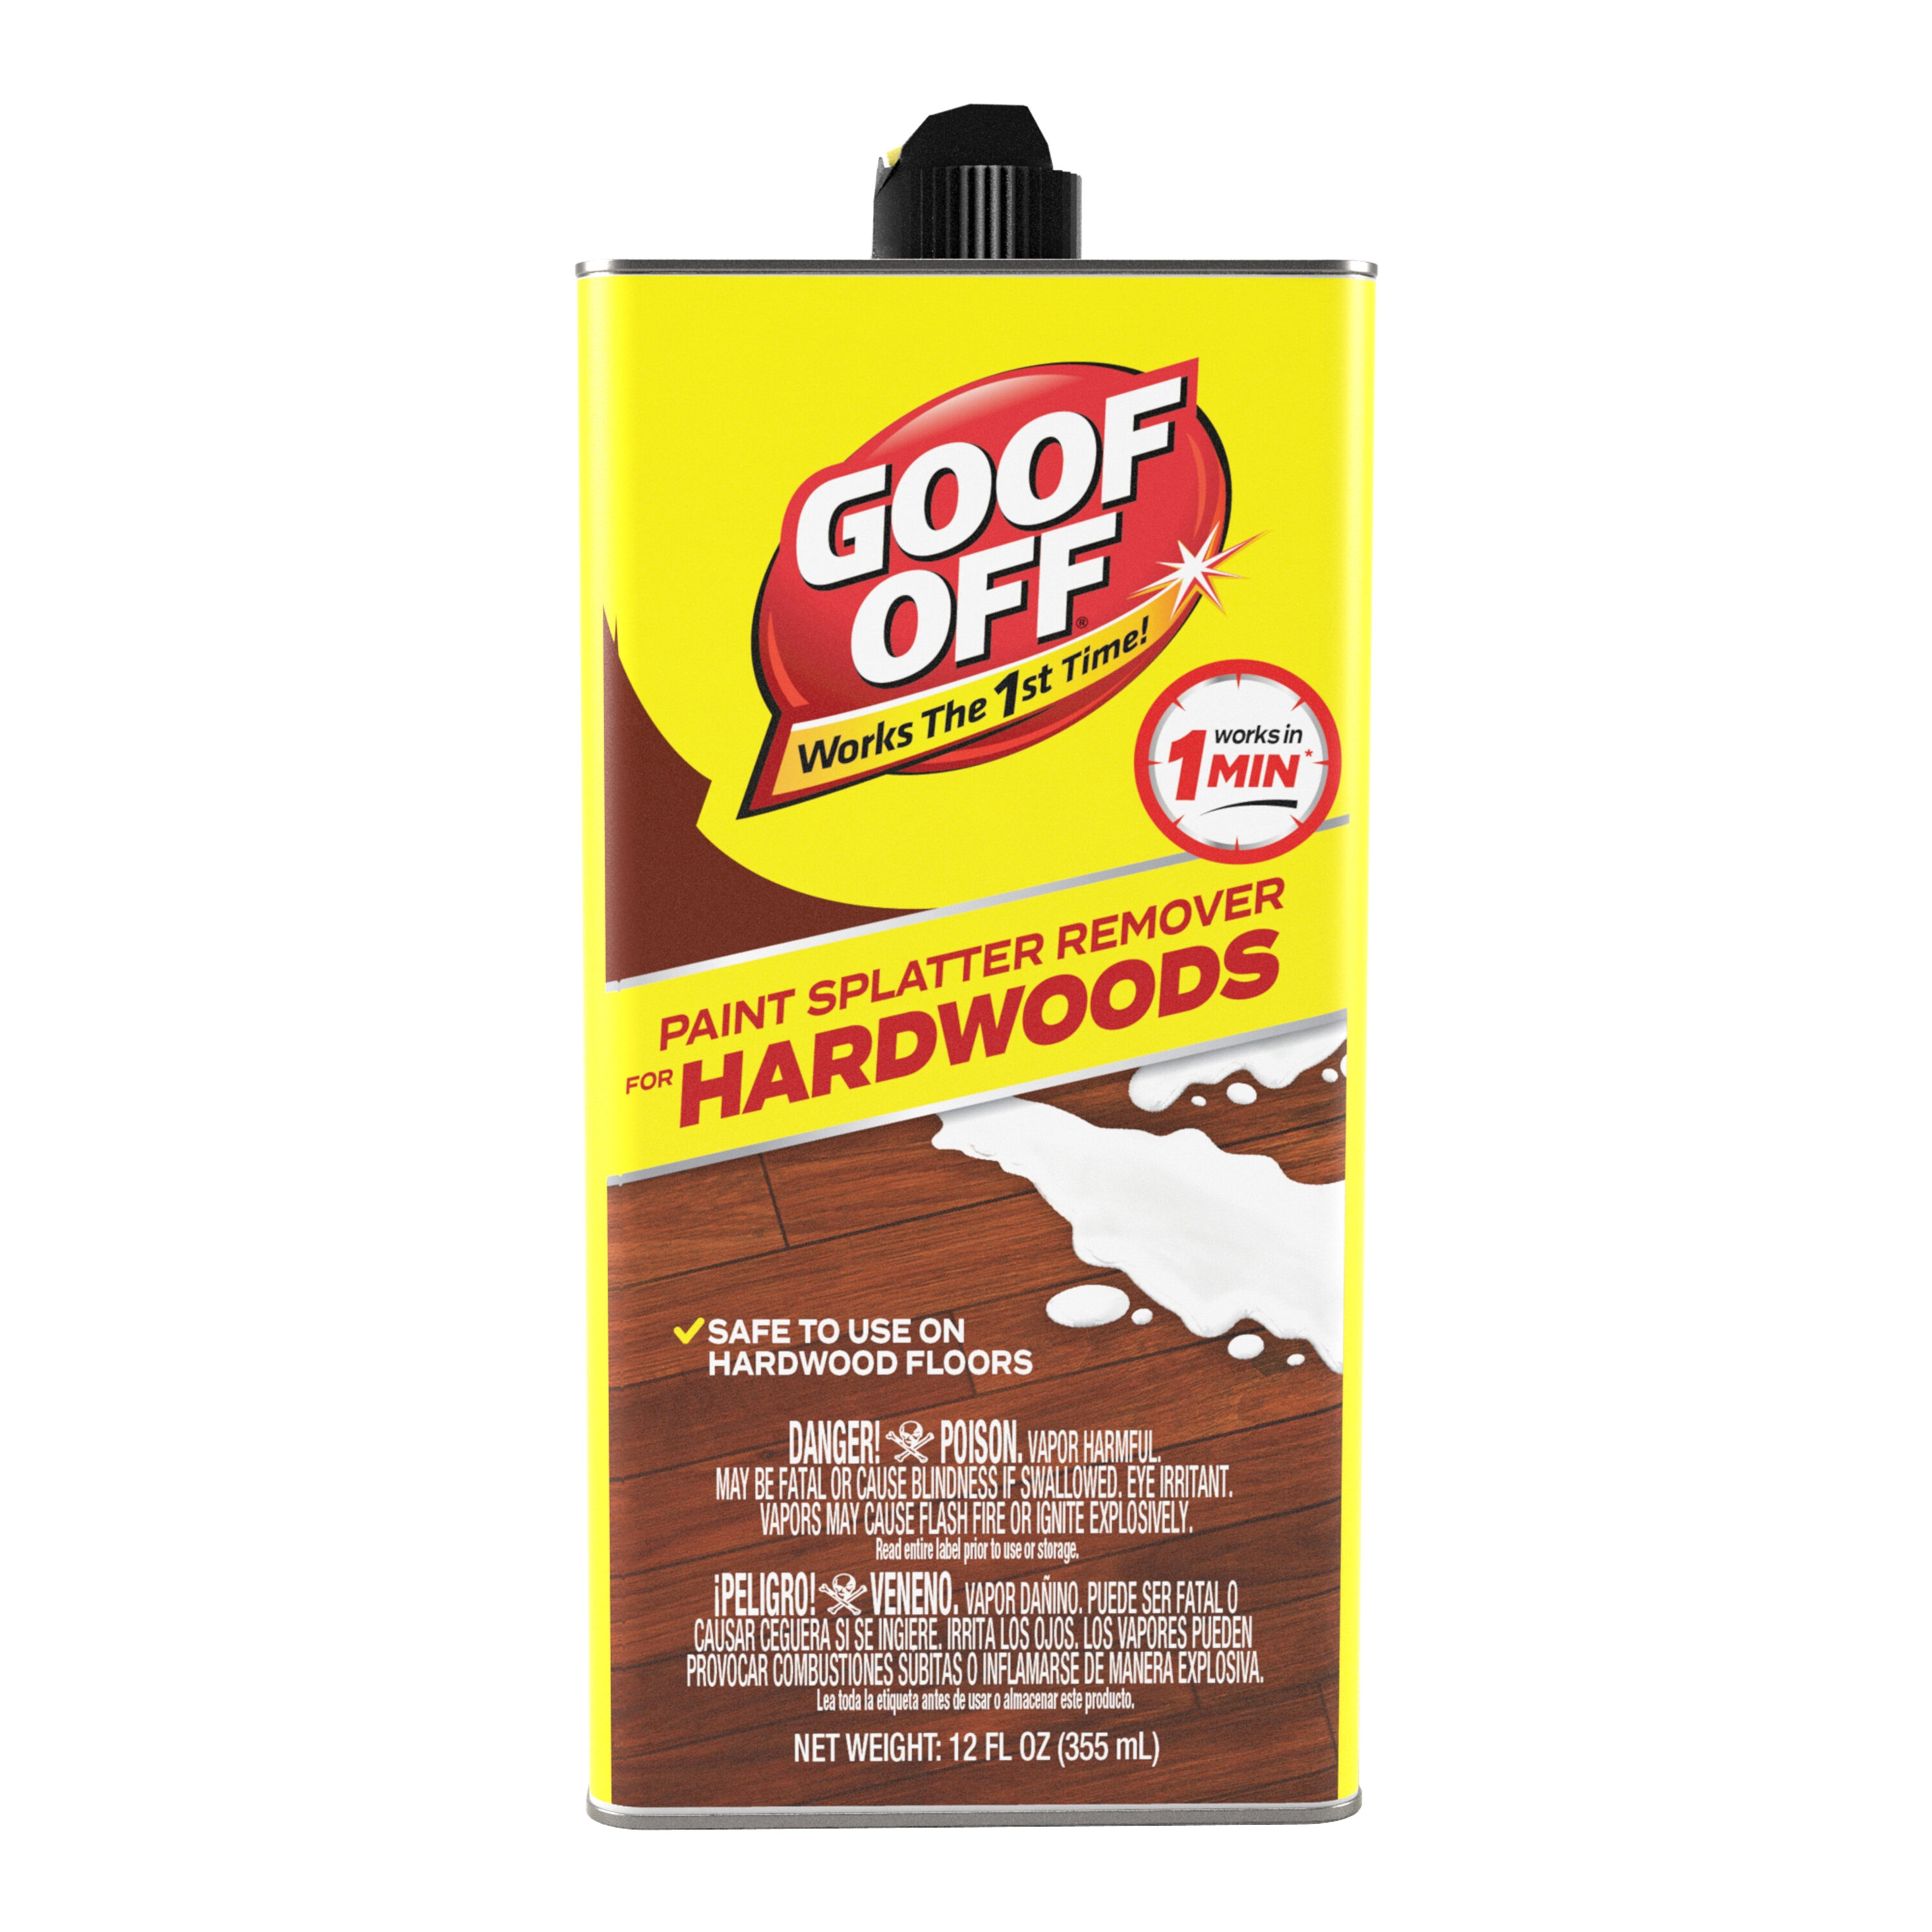 Goof Off® Pro Strength Remover